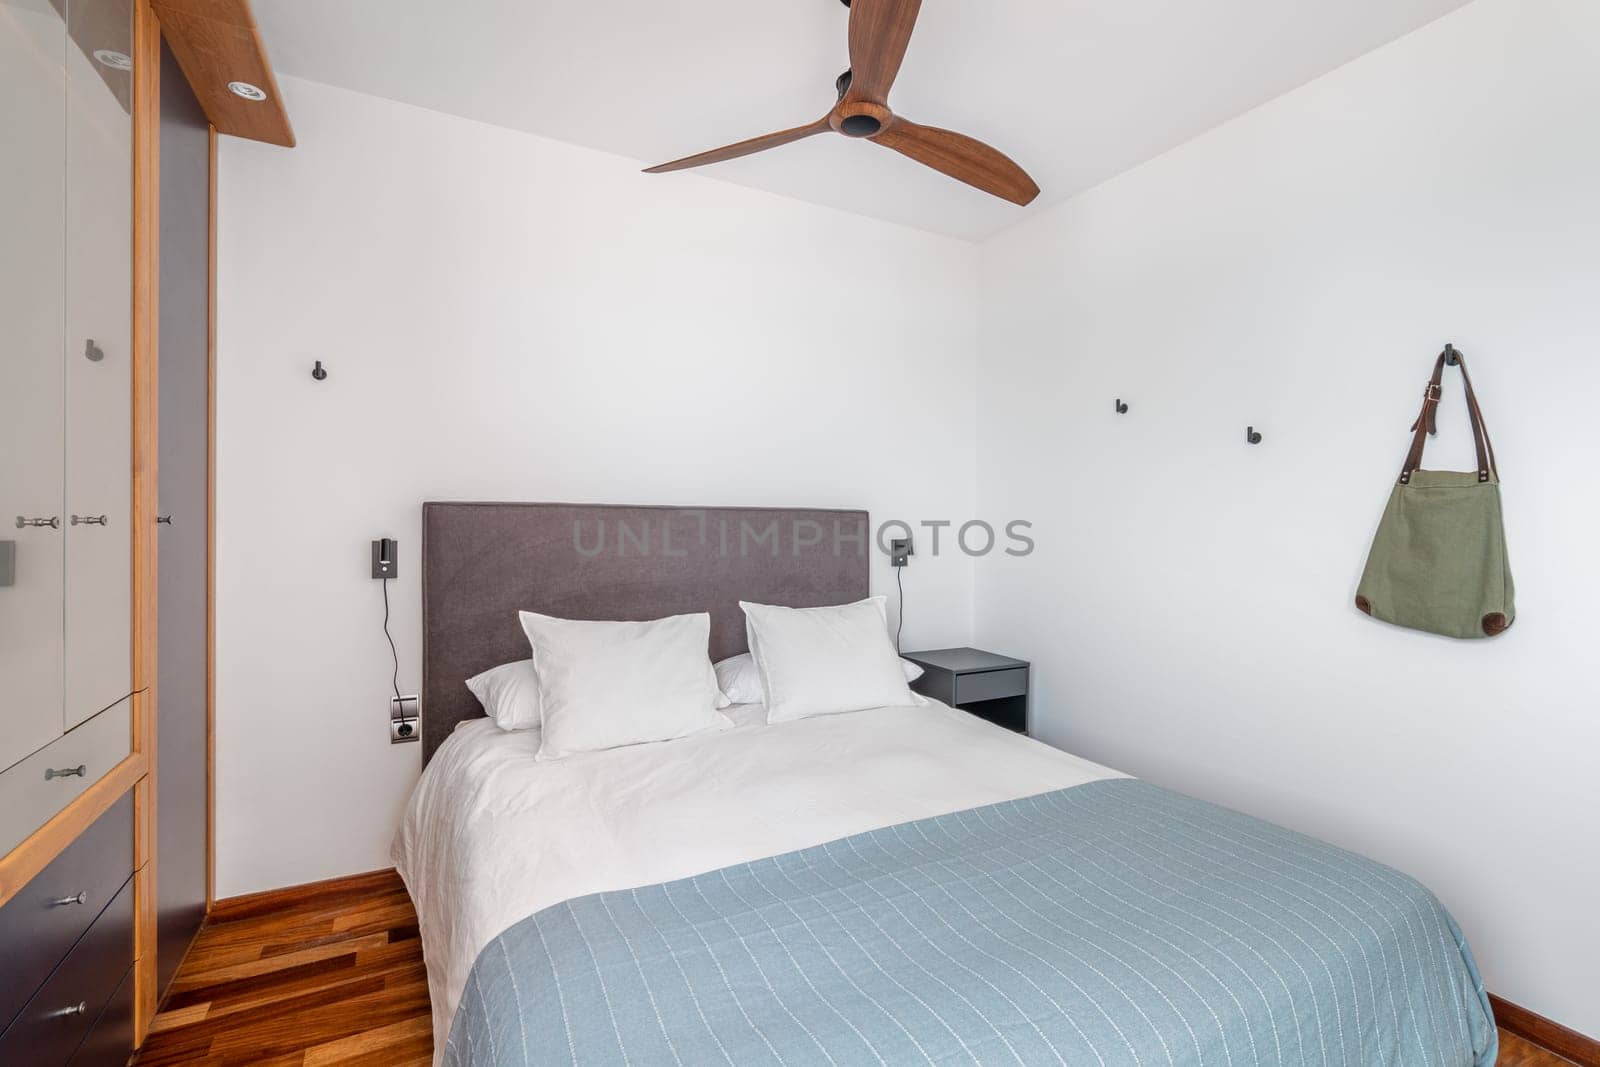 Soft place to sleep in contemporary hotel room. Large bed with pillows and blanket and fan on ceiling in renovated apartment. Interior design